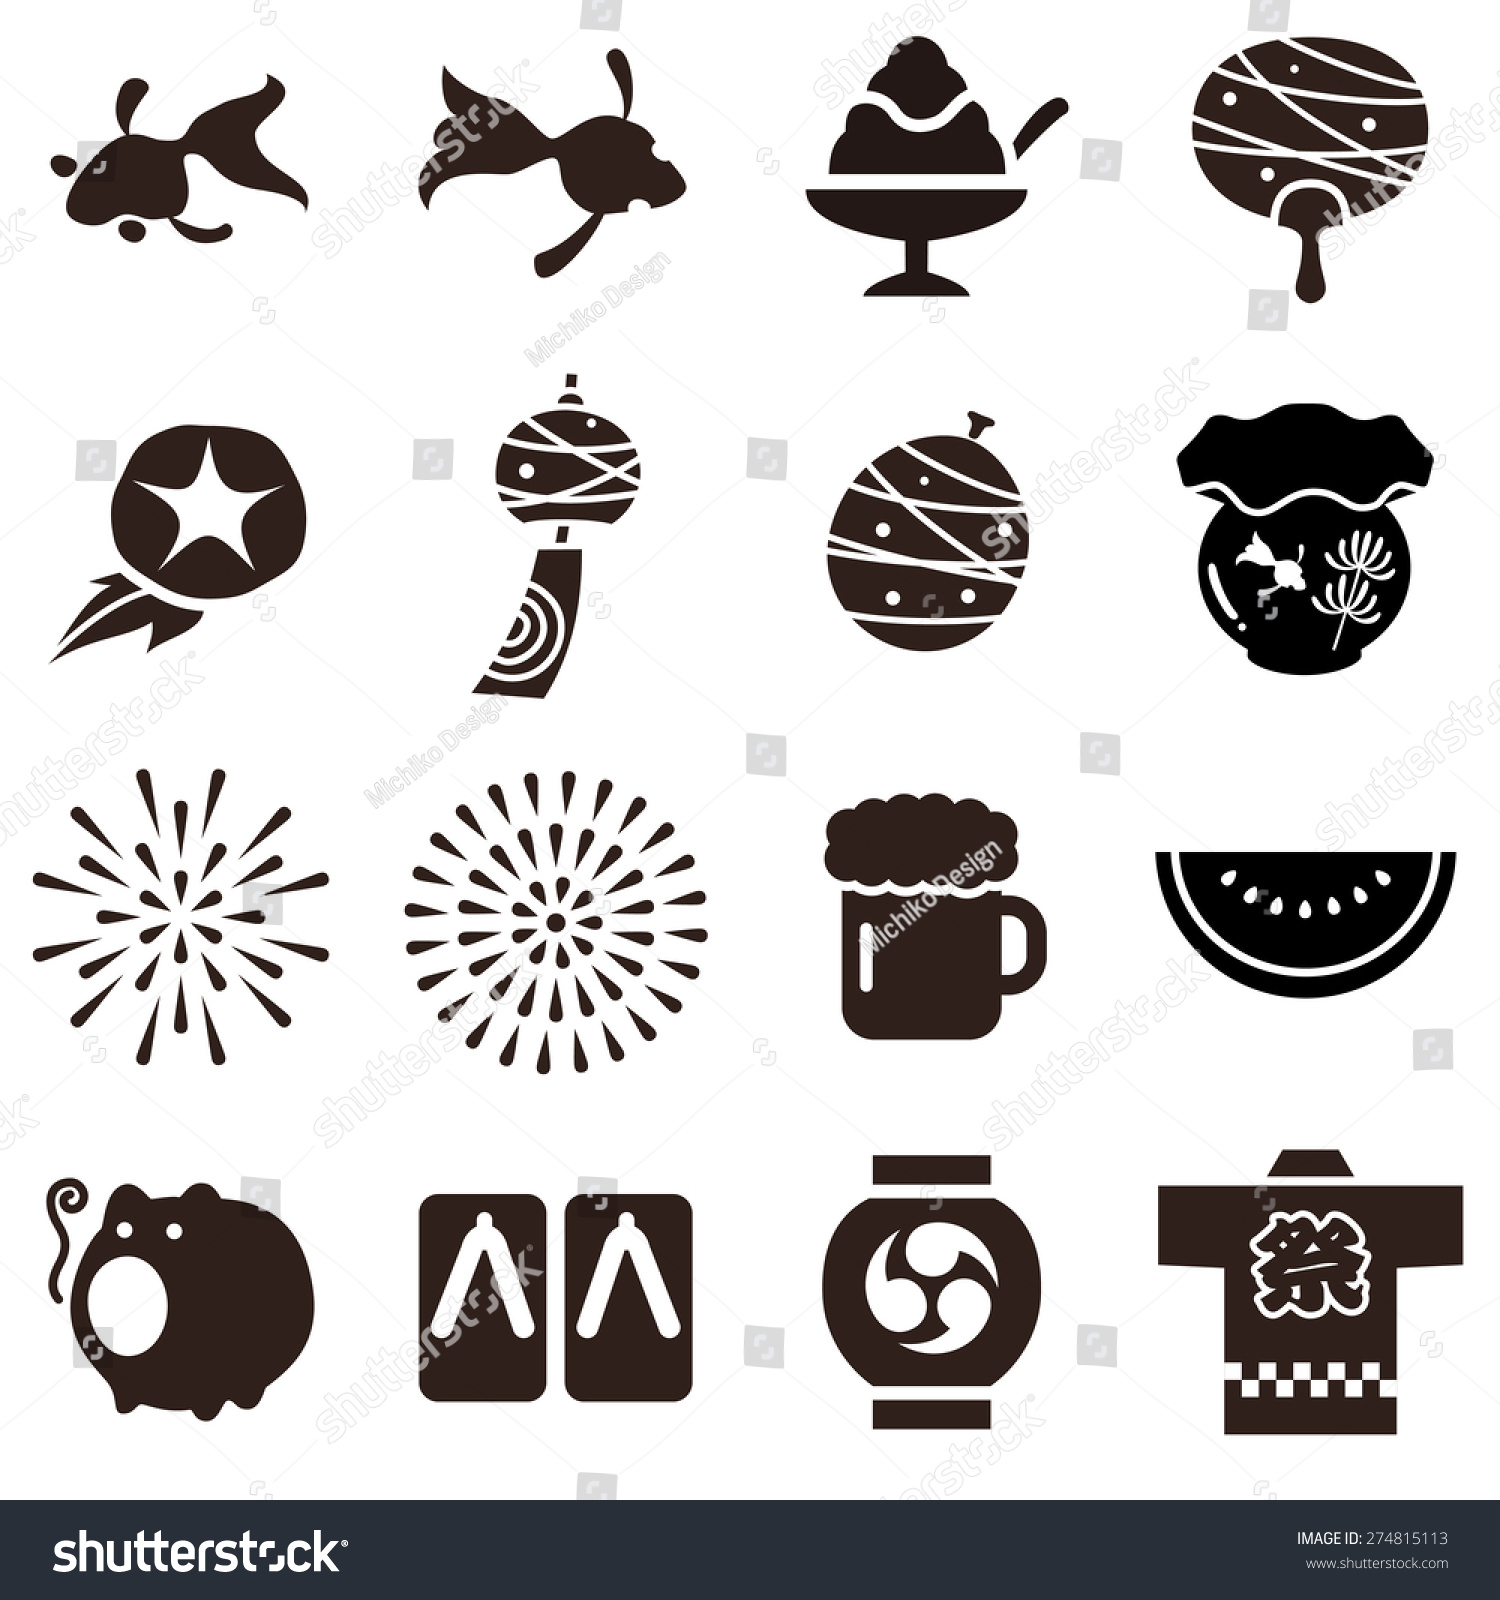 SVG of Illustration of various common things in the summer in Japan
 svg